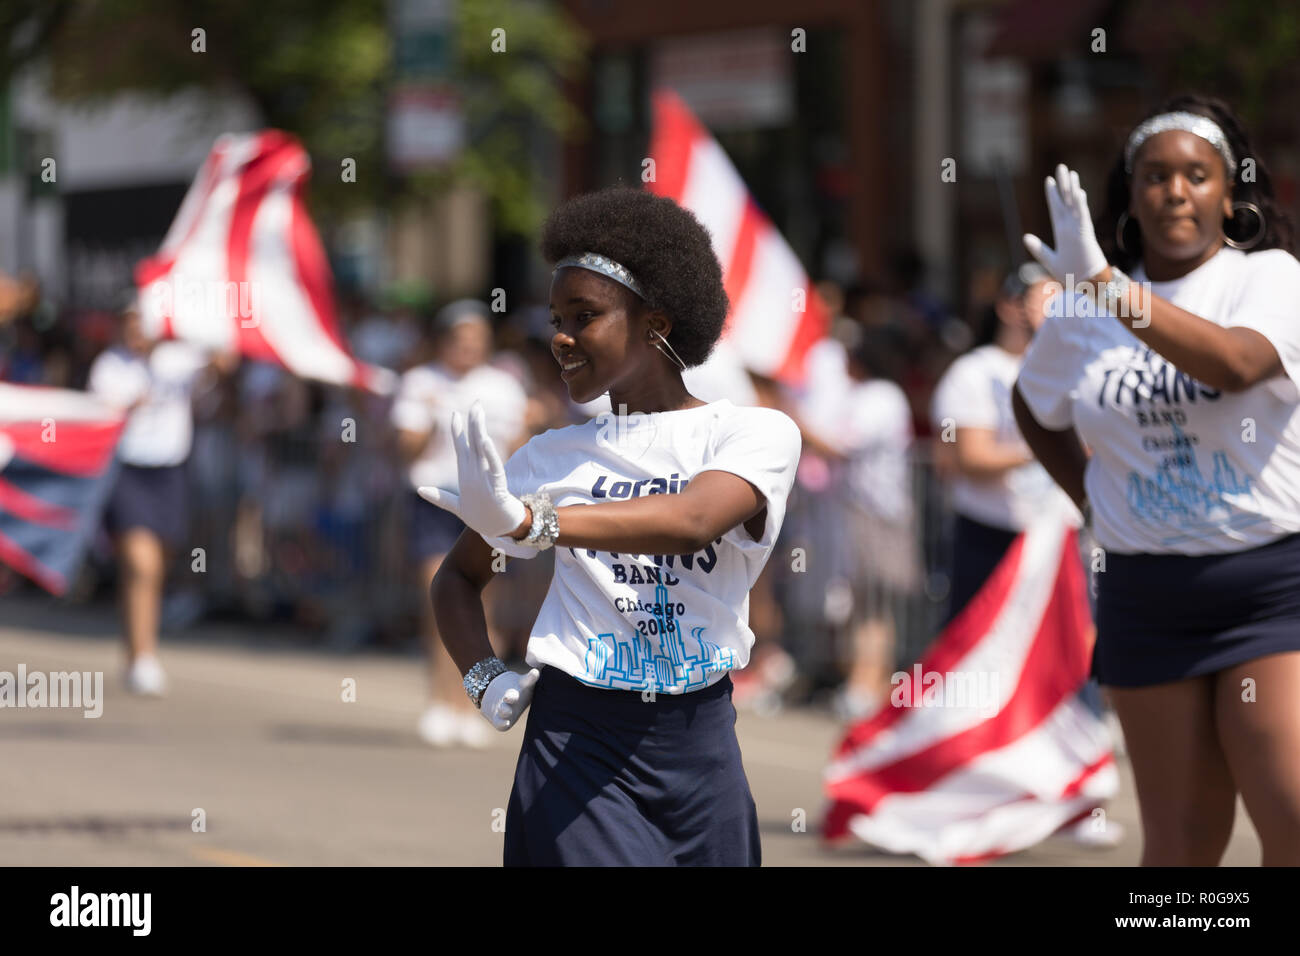 Chicago, Illinois, USA - June 16, 2018: The Puerto Rican People's Parade, Members of the Lorain Titans Band Chicago performing at the parade Stock Photo